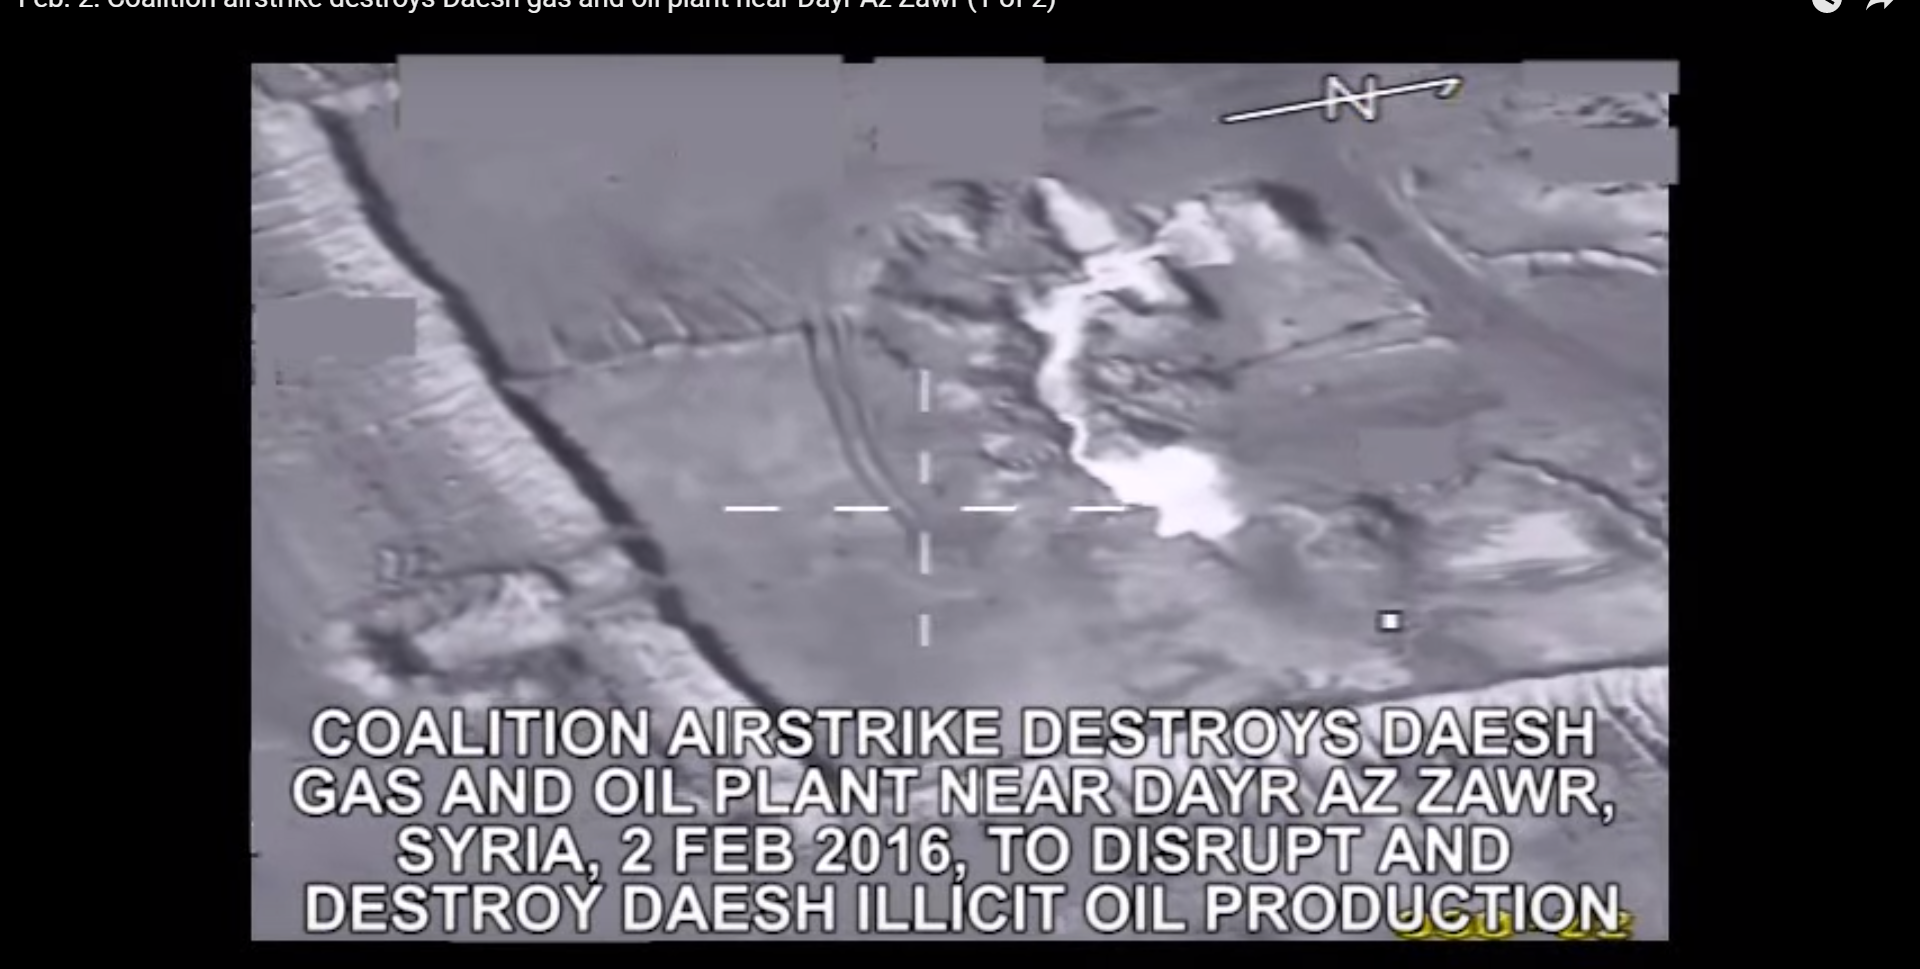 More air strikes have been targeting oil and gas plants